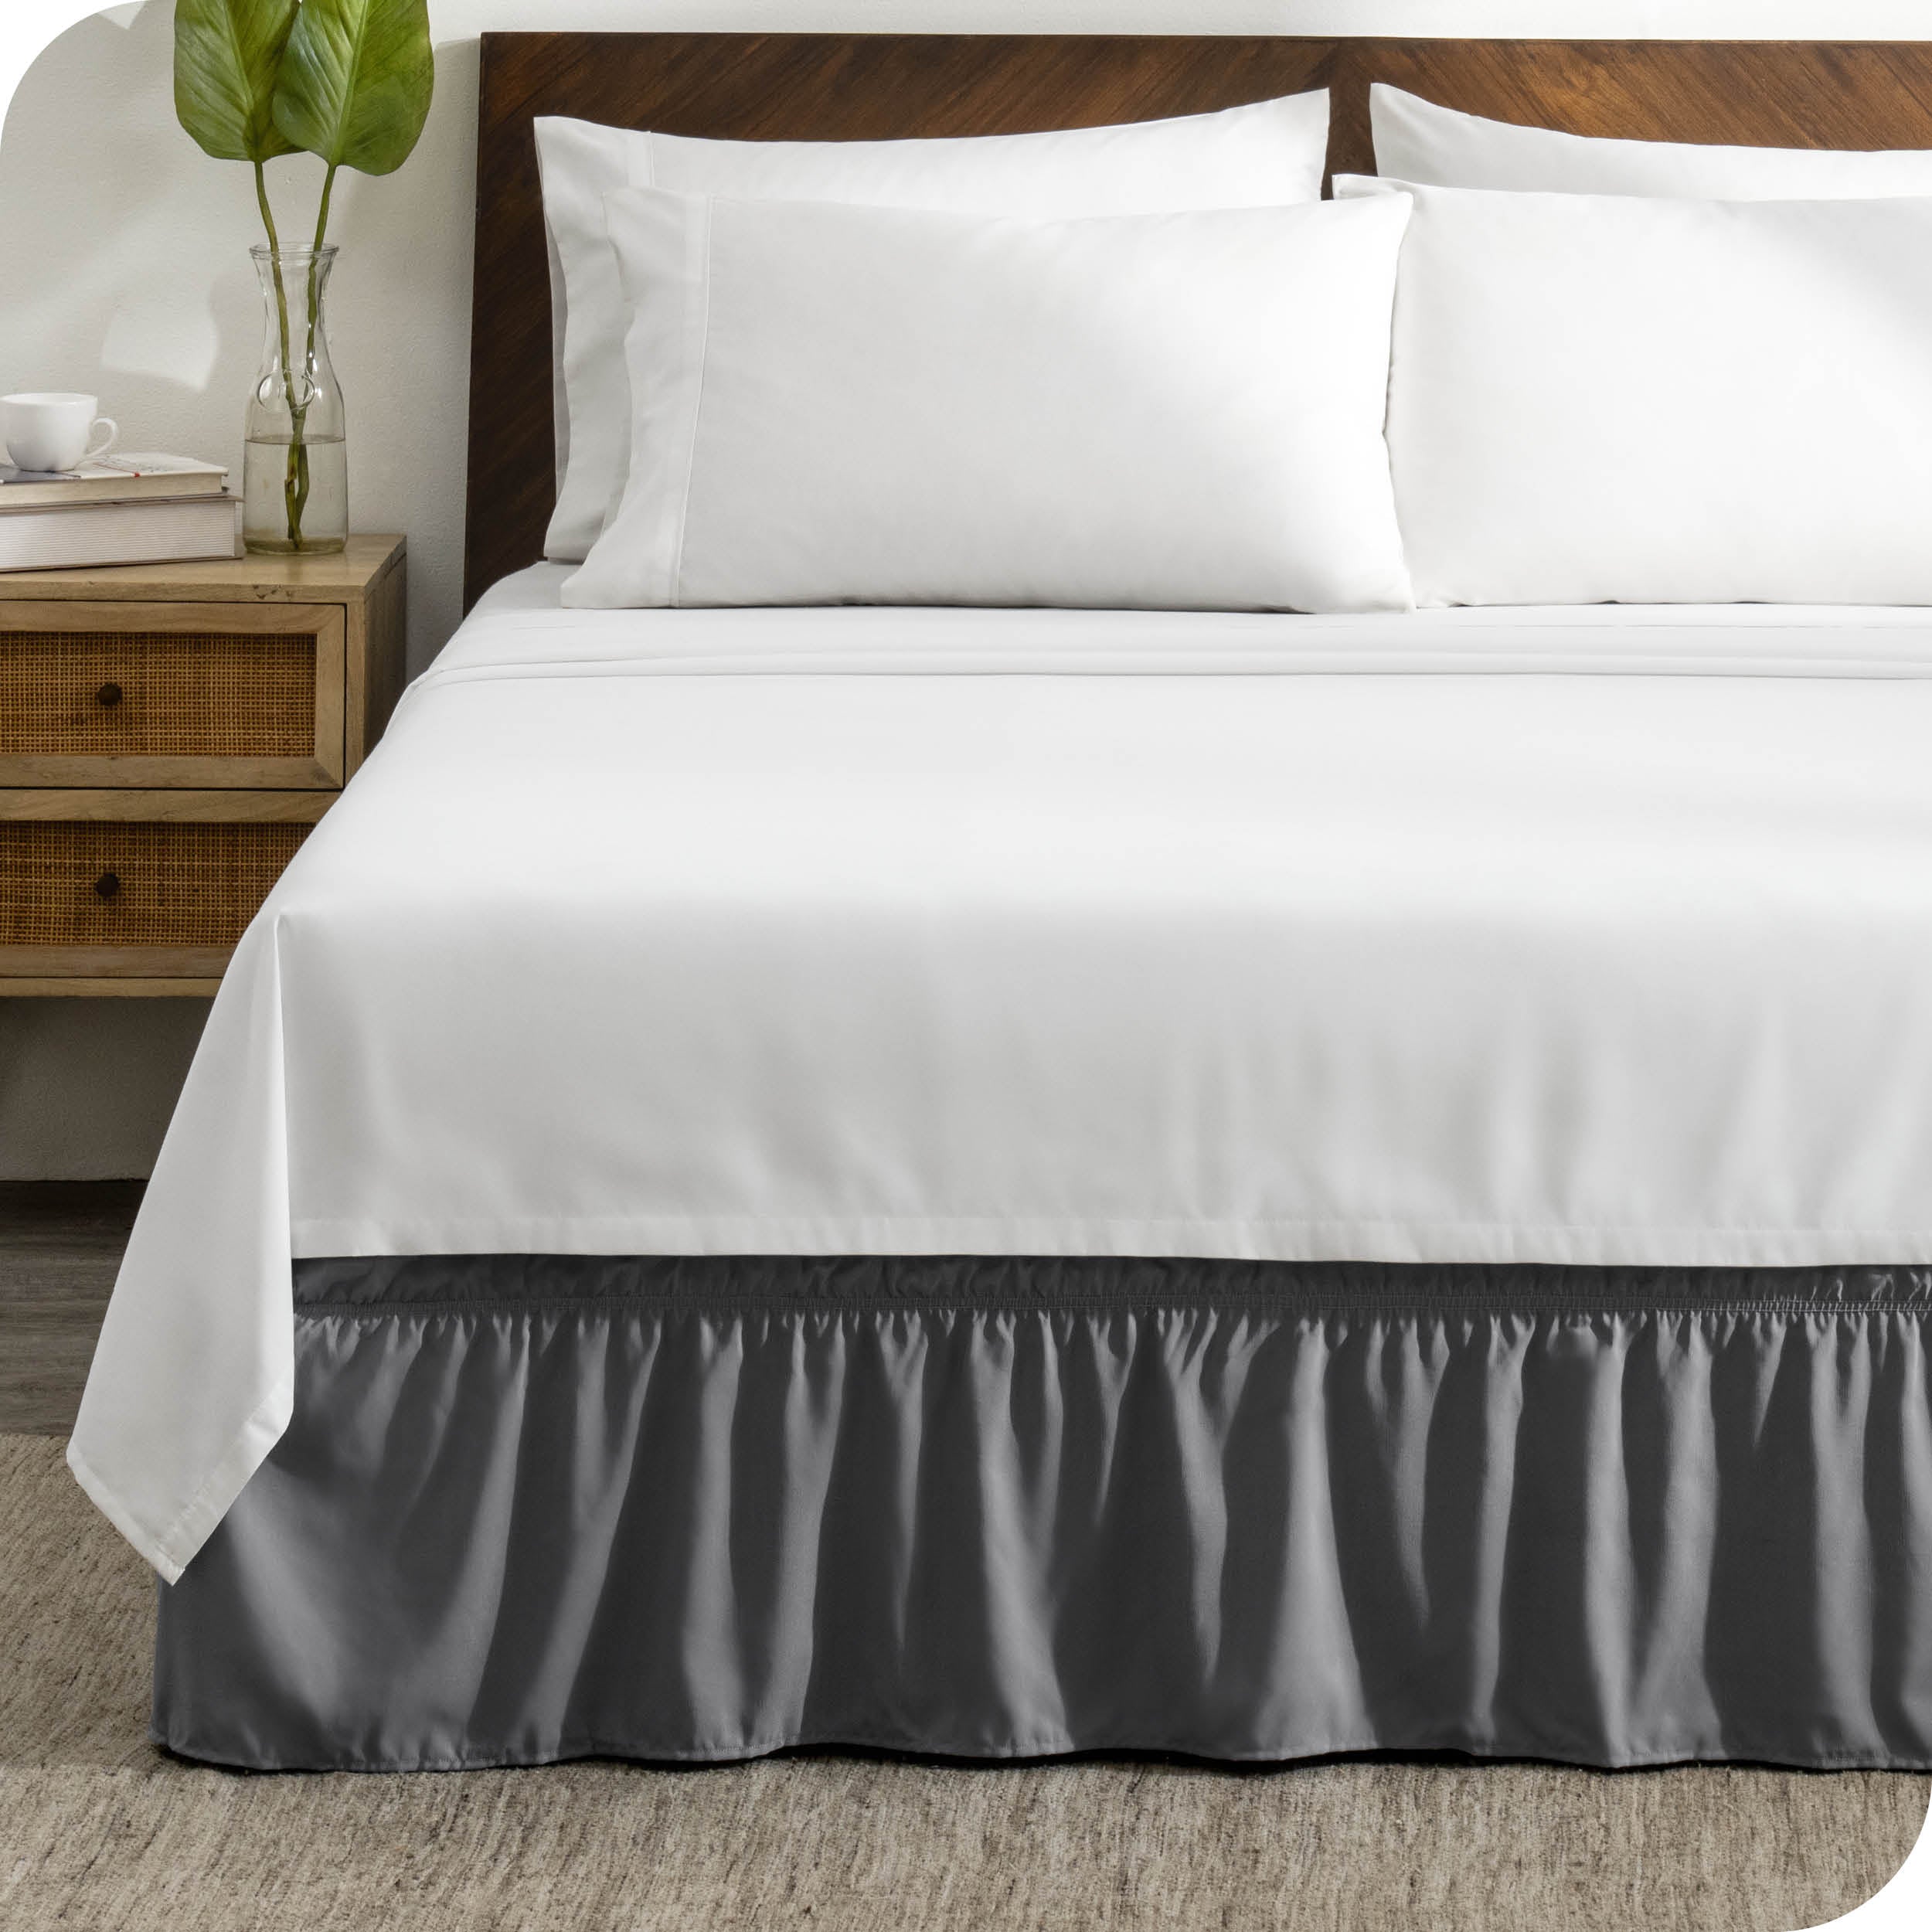 A wrap around bed skirt on a mattress with white bedding